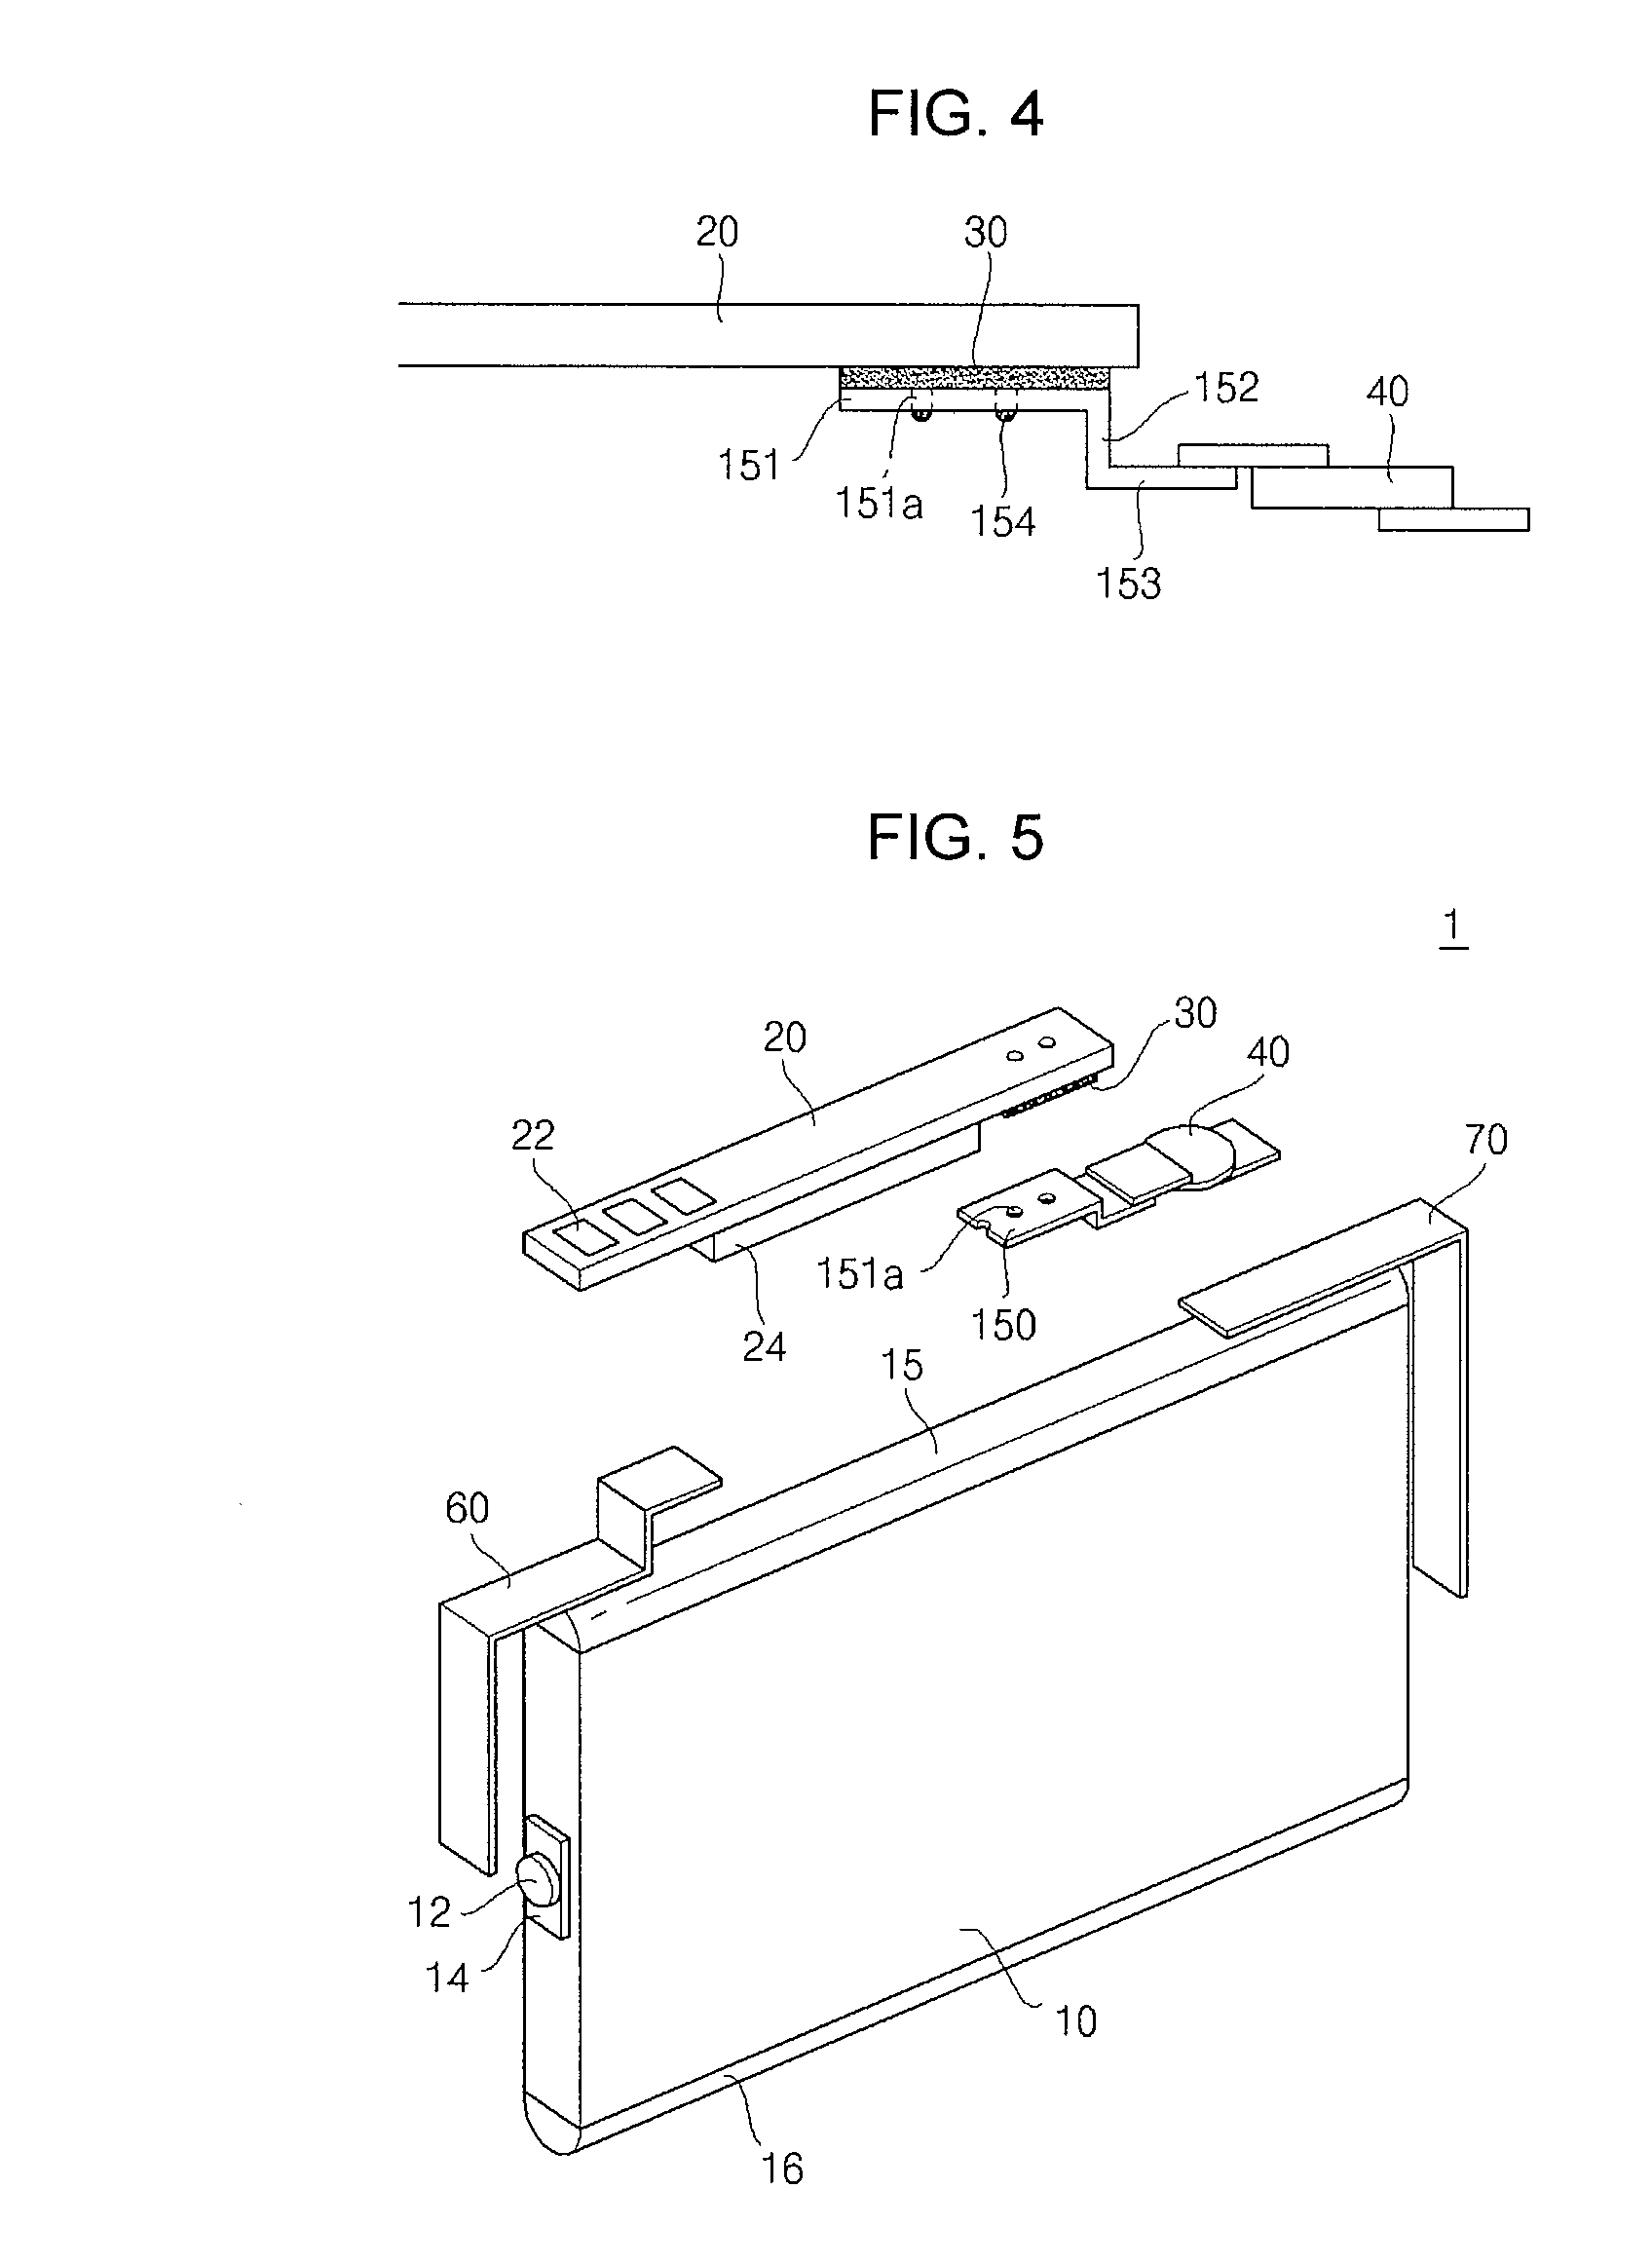 Secondary battery with protective circuit module